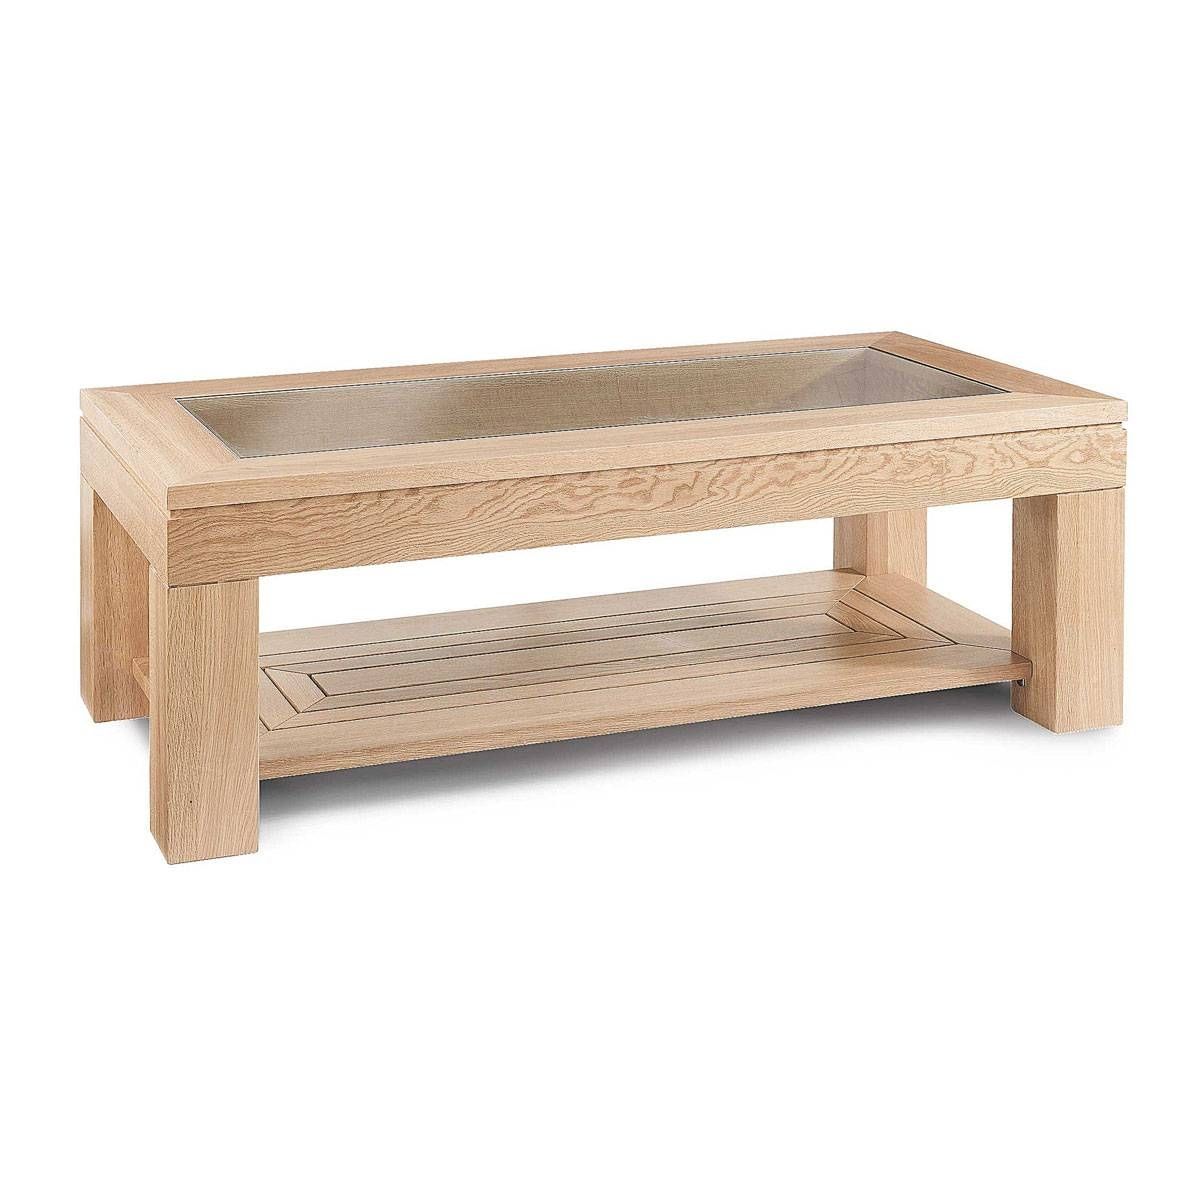 20 Great Rectangular Oak Coffee Tables | Home Design Lover Inside Glass And Oak Coffee Tables (View 17 of 30)